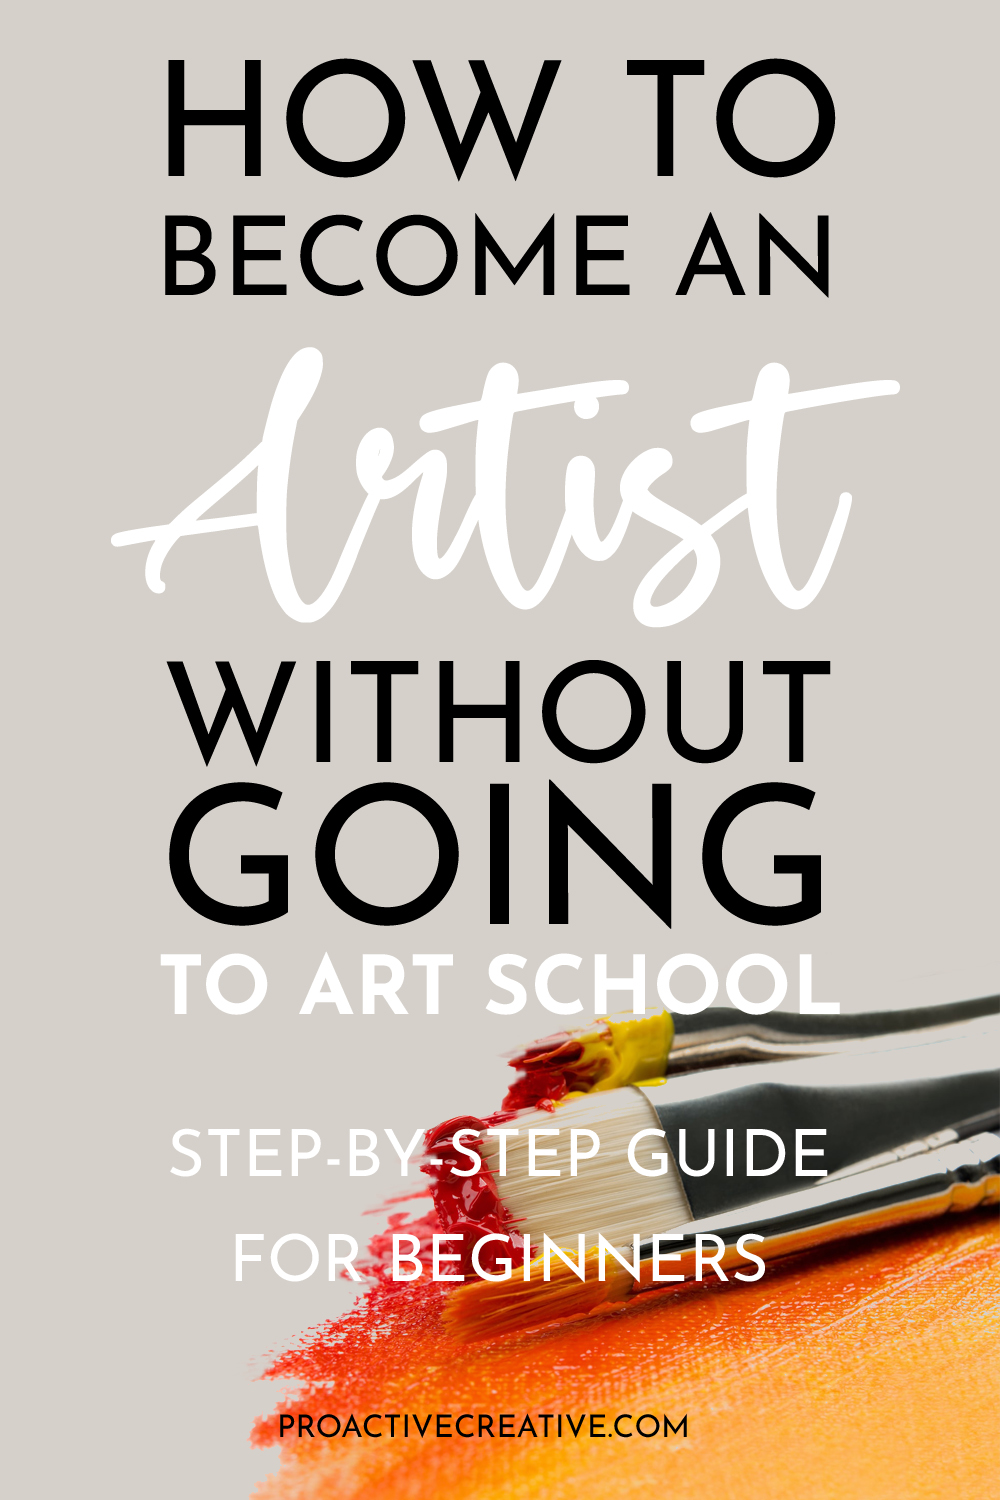 How to become an artist without a degree